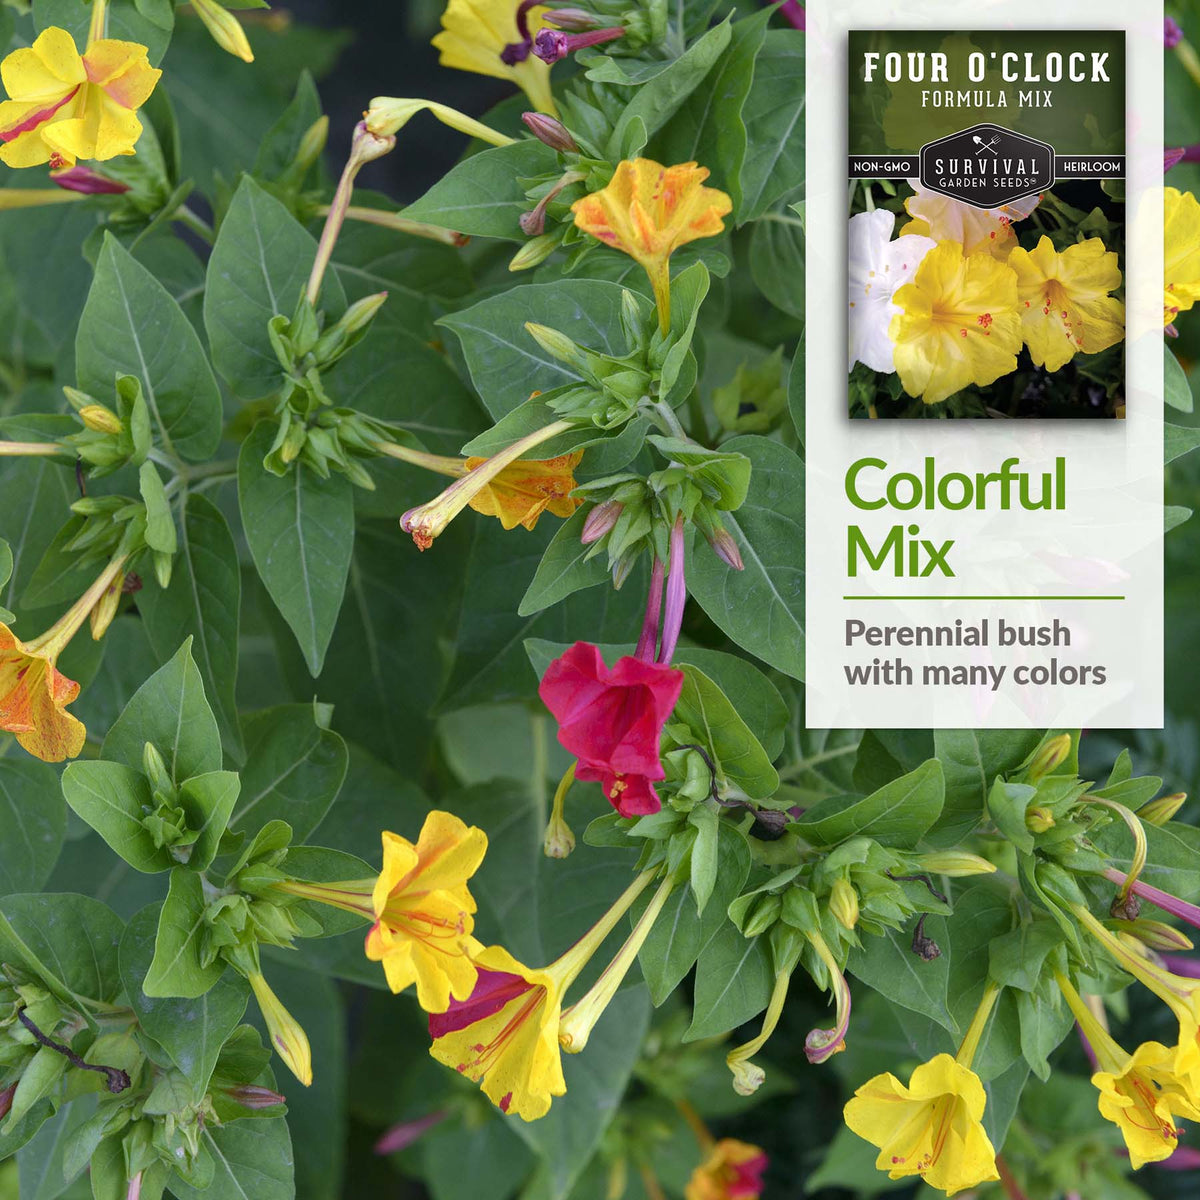 Four O&#39;Clock is a perennial bush with many different color blooms